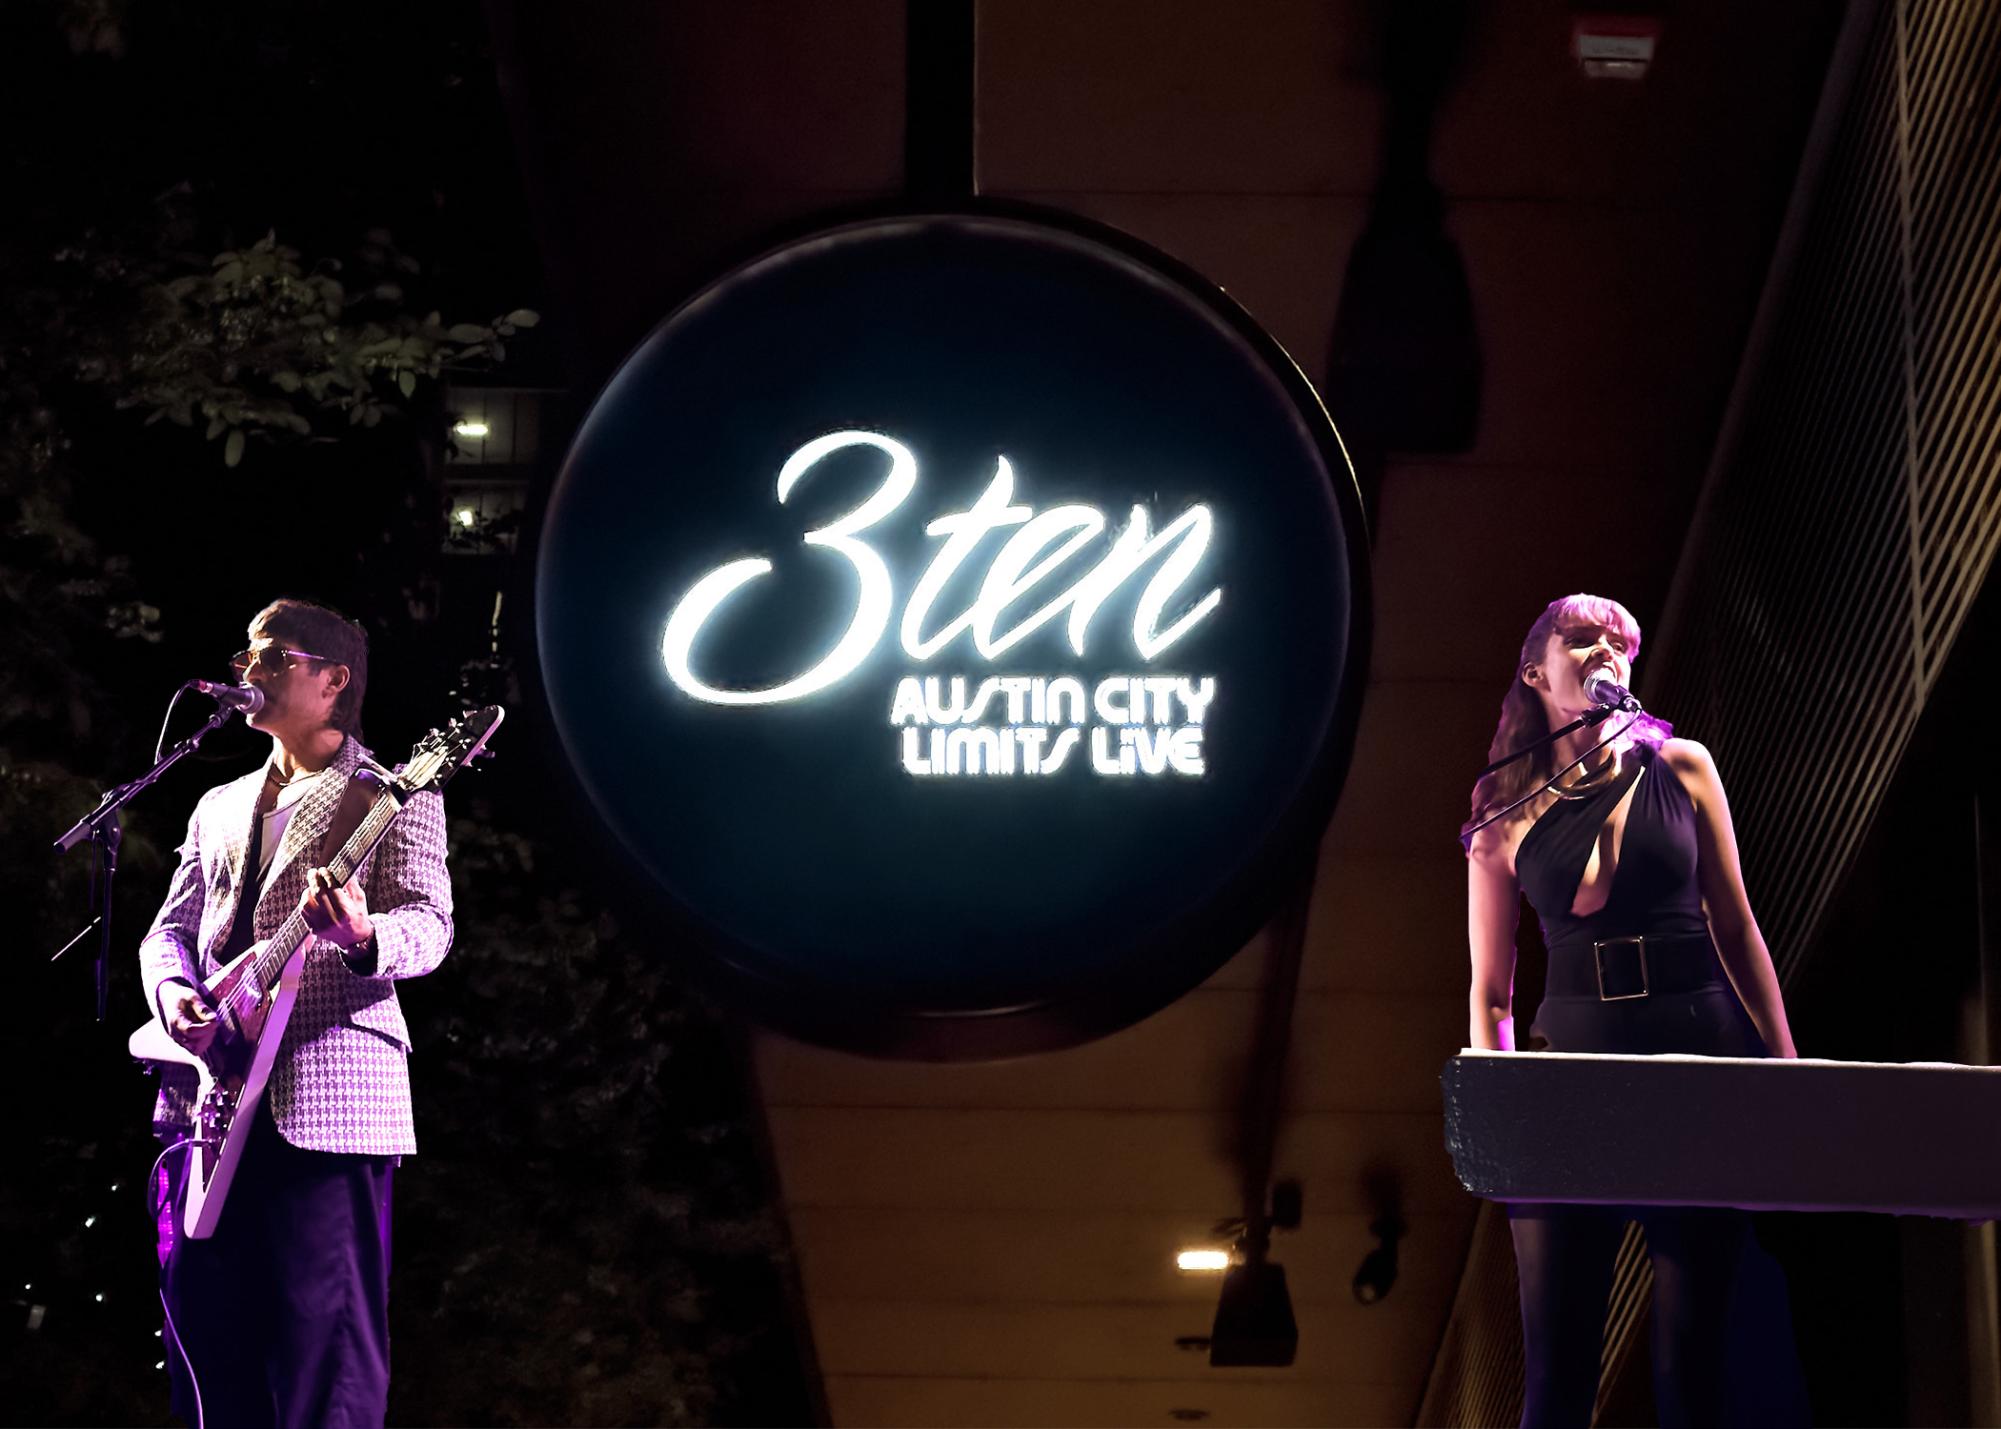 Musicians Jane Bryant and Daniel Leopold performed to a small crowd at 3TEN during weekend one of Austin City Limits music festival. 3TEN is dedicated to hosting a myriad of local up and coming artists.